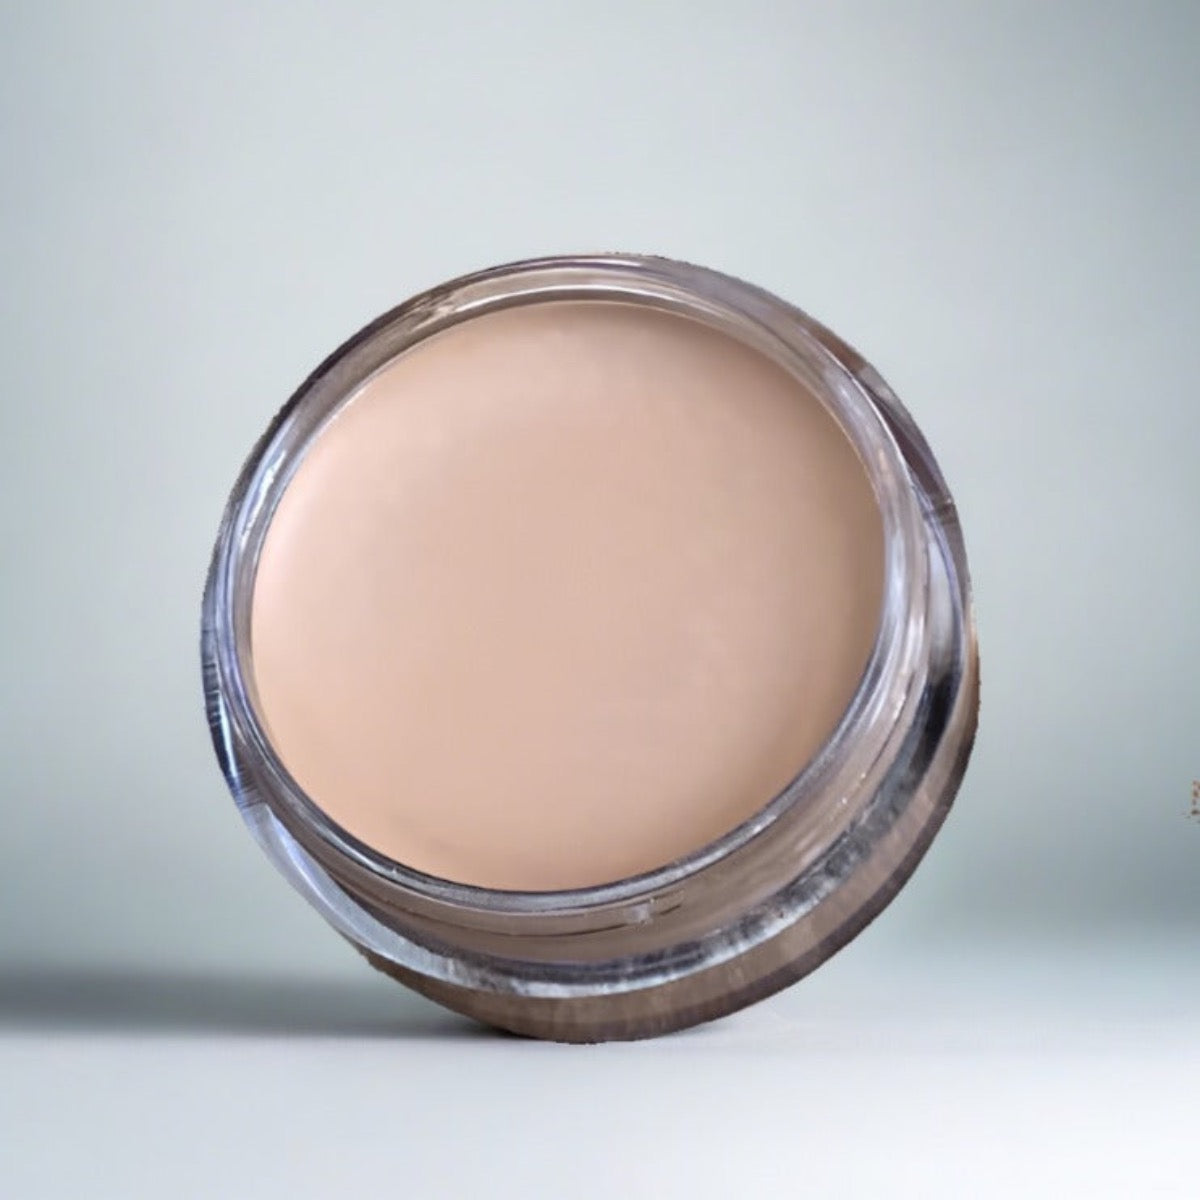 Cosmetic jar of Blemish and Capillary Cream Concealer: Close-up view highlighting the creamy texture and rich pigment of the product